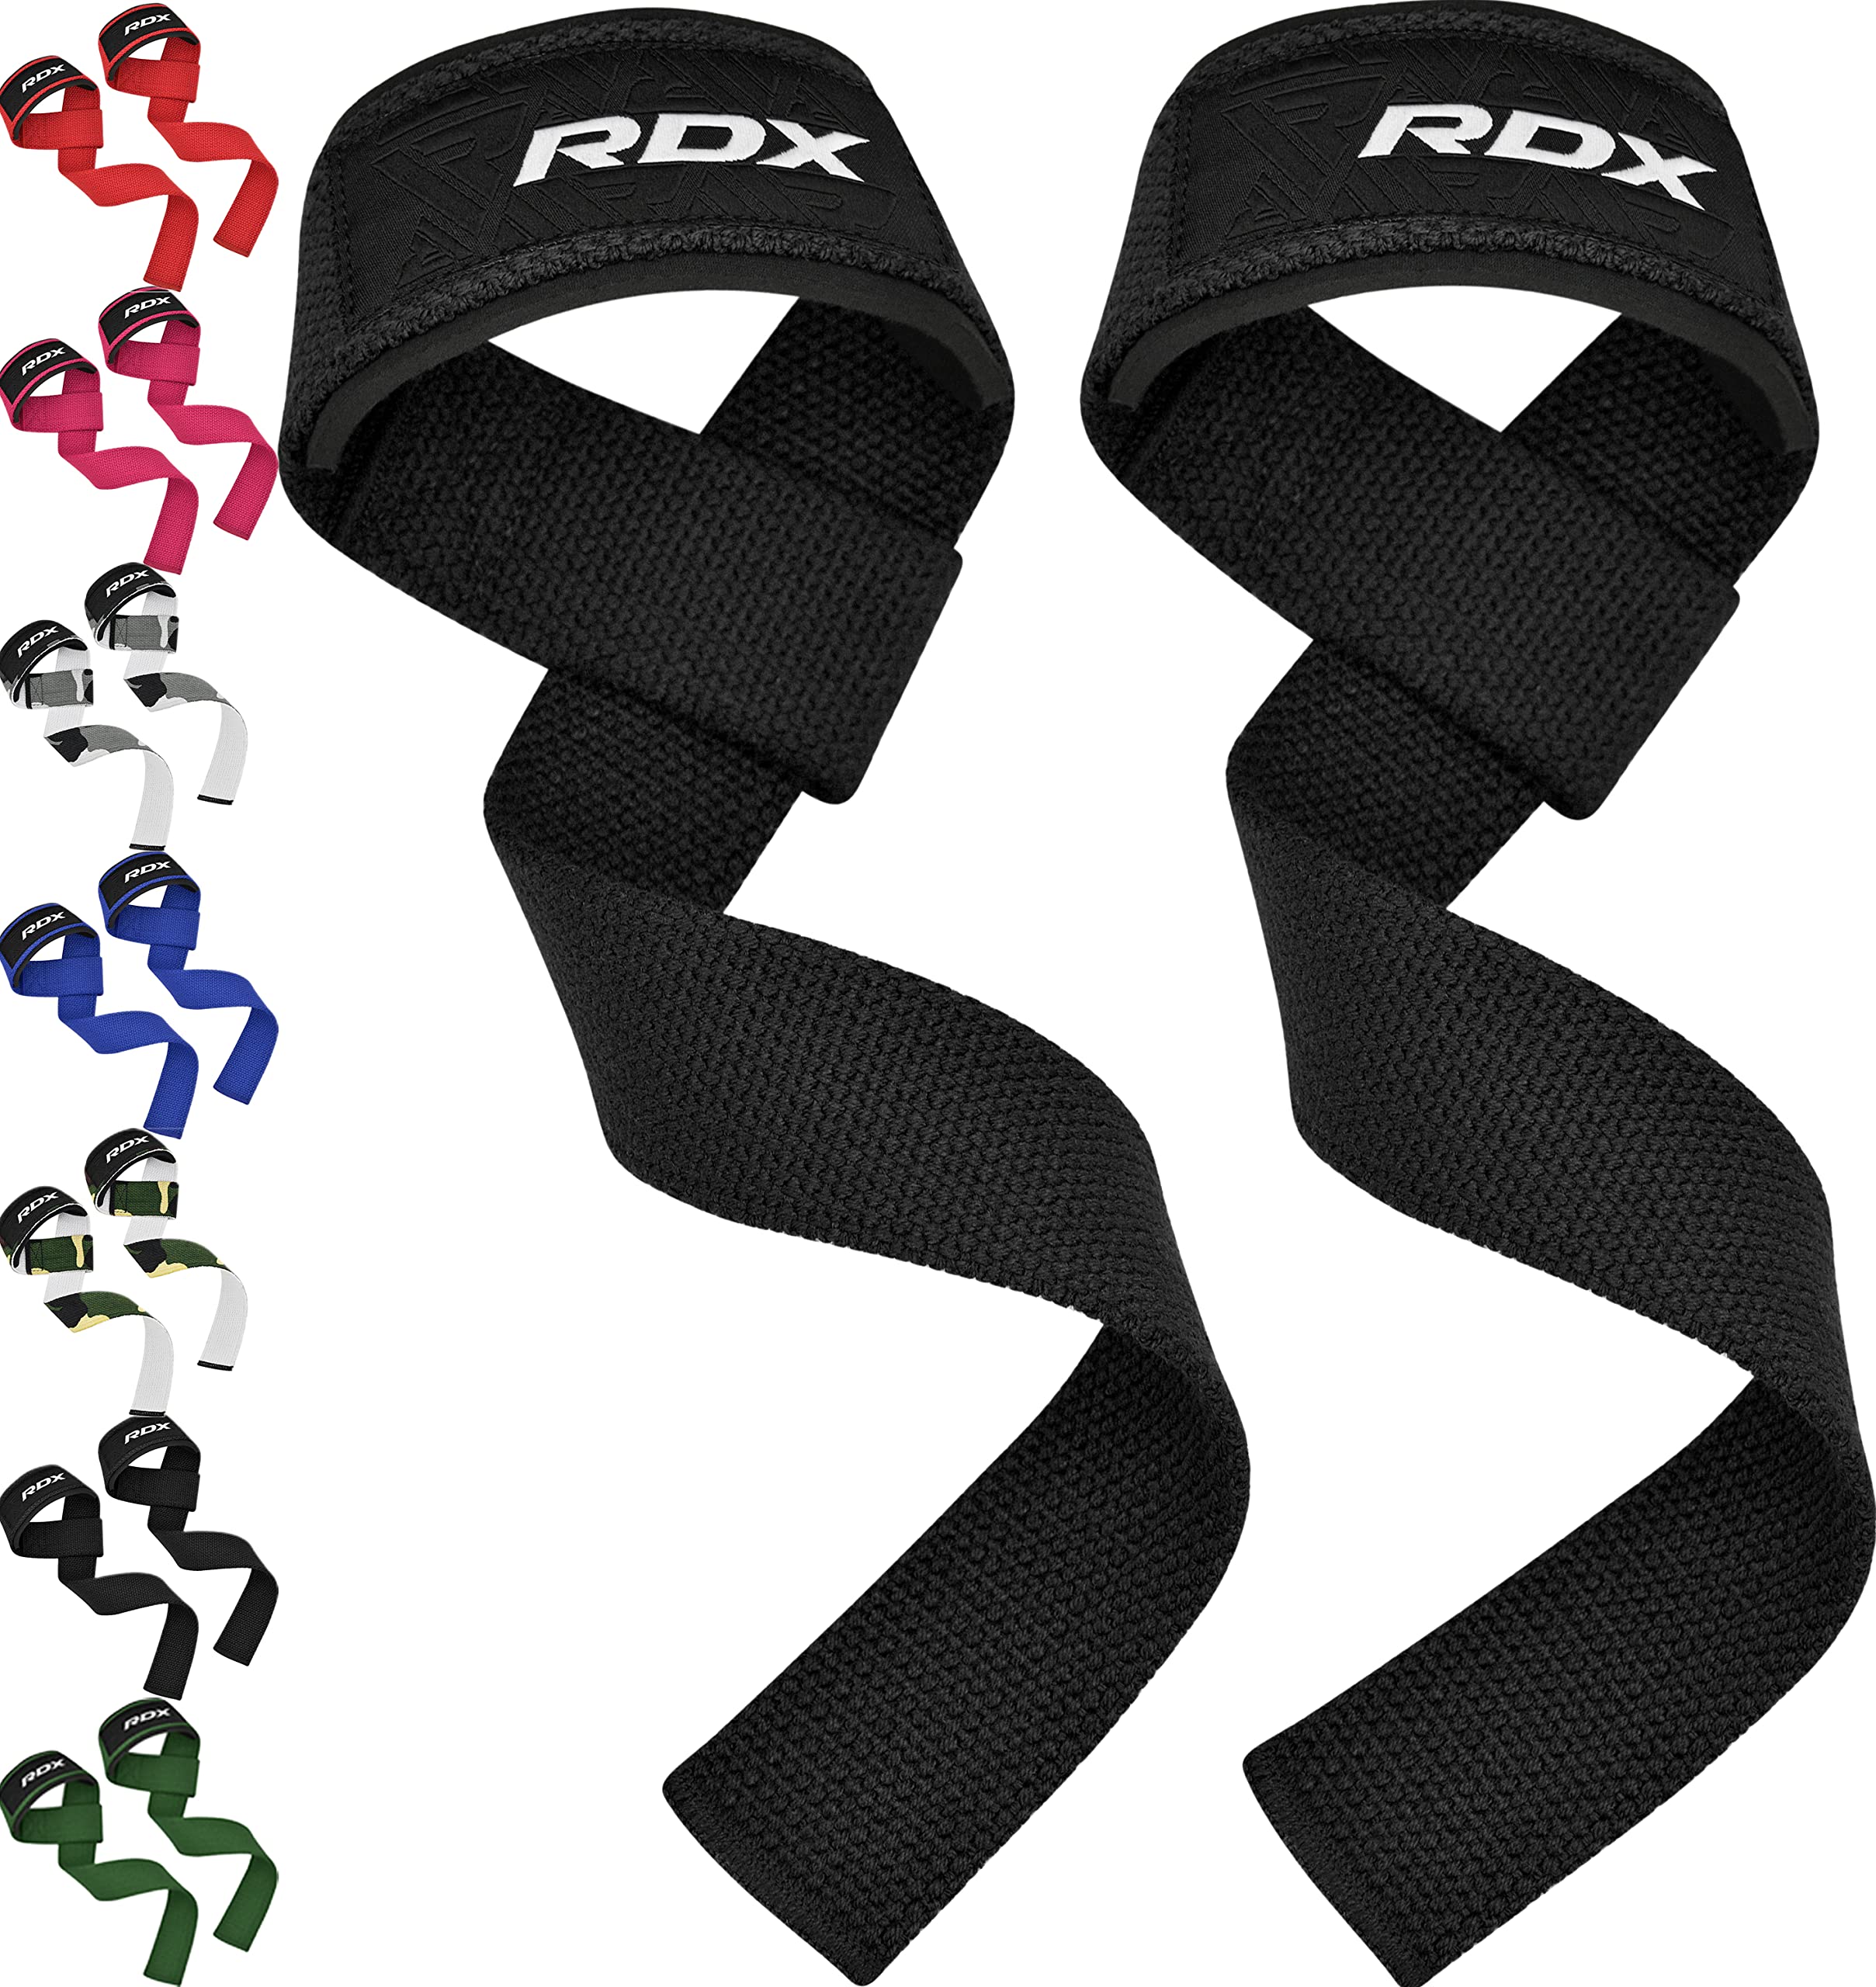 RDX Weight Lifting Hooks Straps Pair, Non-Slip Rubber Coated Grip, 7mm  Neoprene Padded Wrist Support Powerlifting Deadlift Pull Up Fitness  Strength Training Wrap, Gym Bodybuilding, Workout 